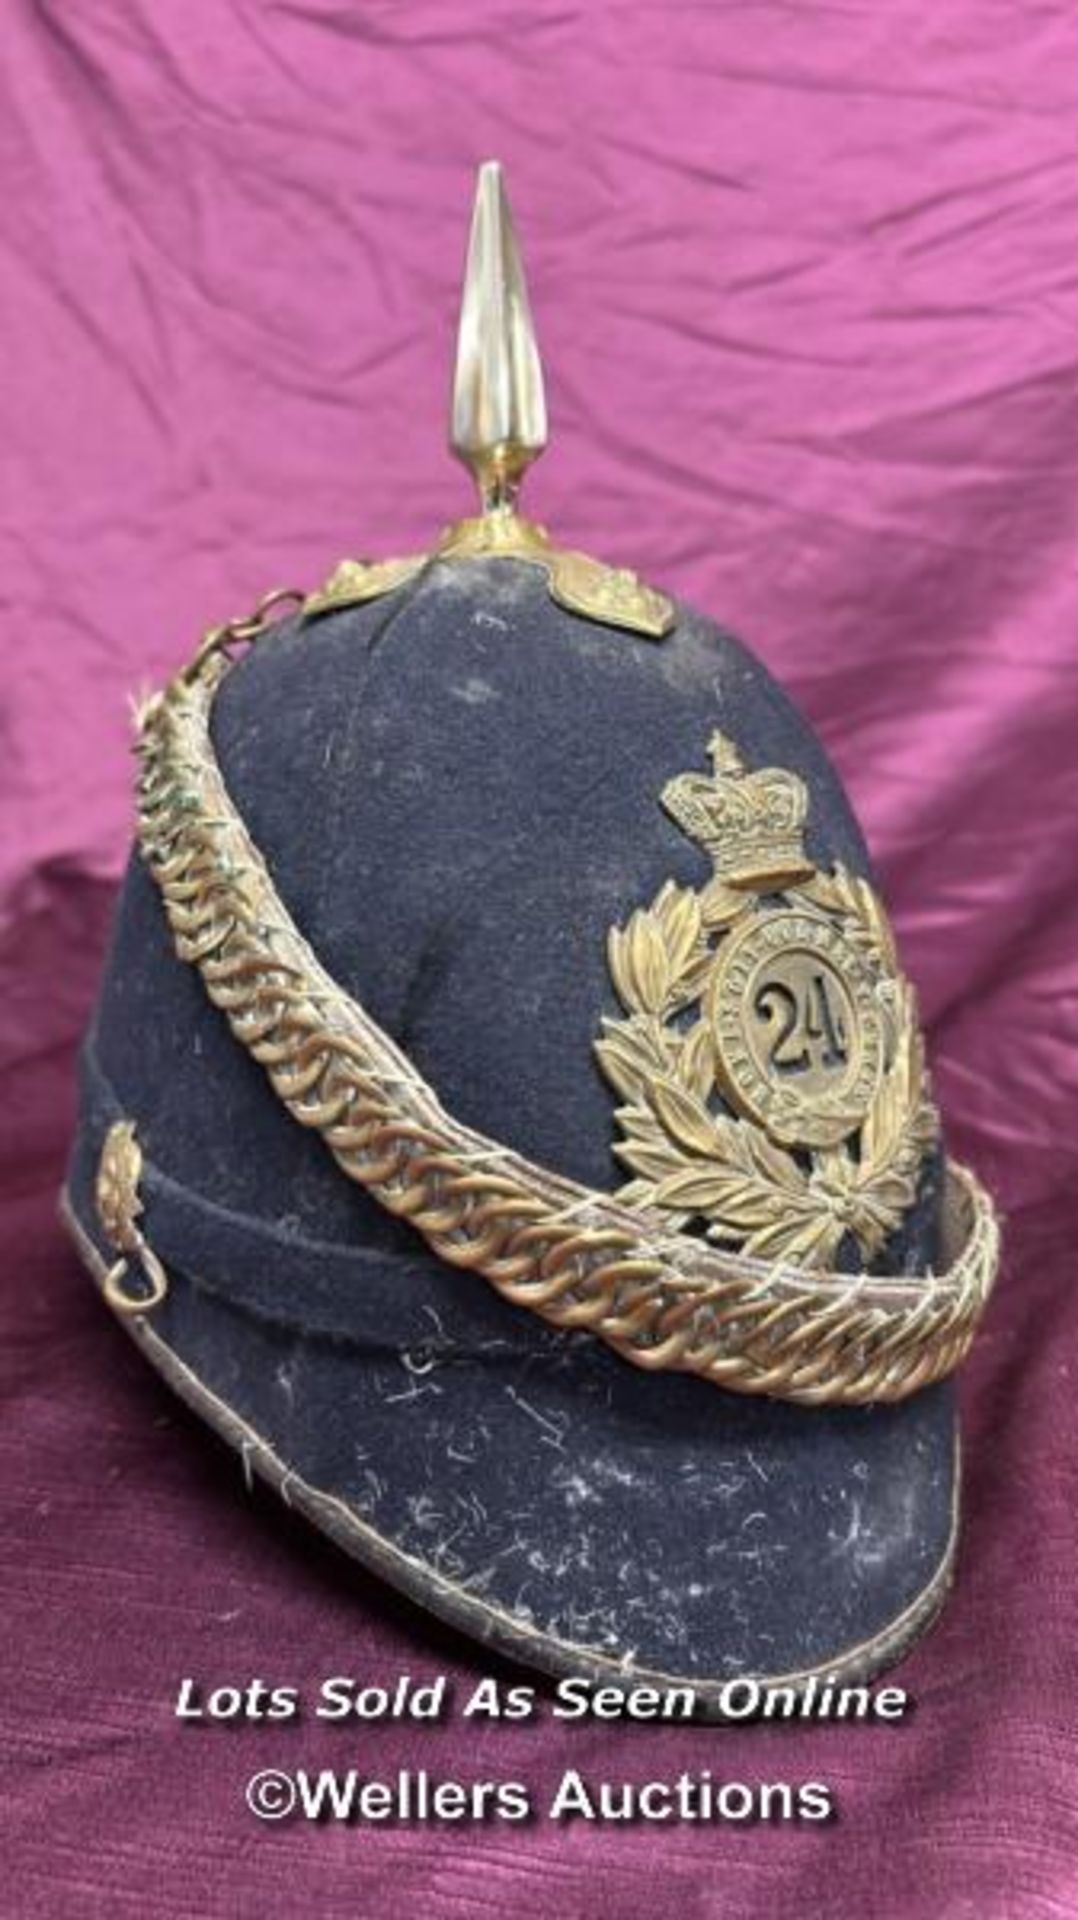 BRITISH HOME SERVICE SPIKED HELMET TO THE 24TH REGIMENT OF FOOT, APPEARS TO BE THEATRICAL